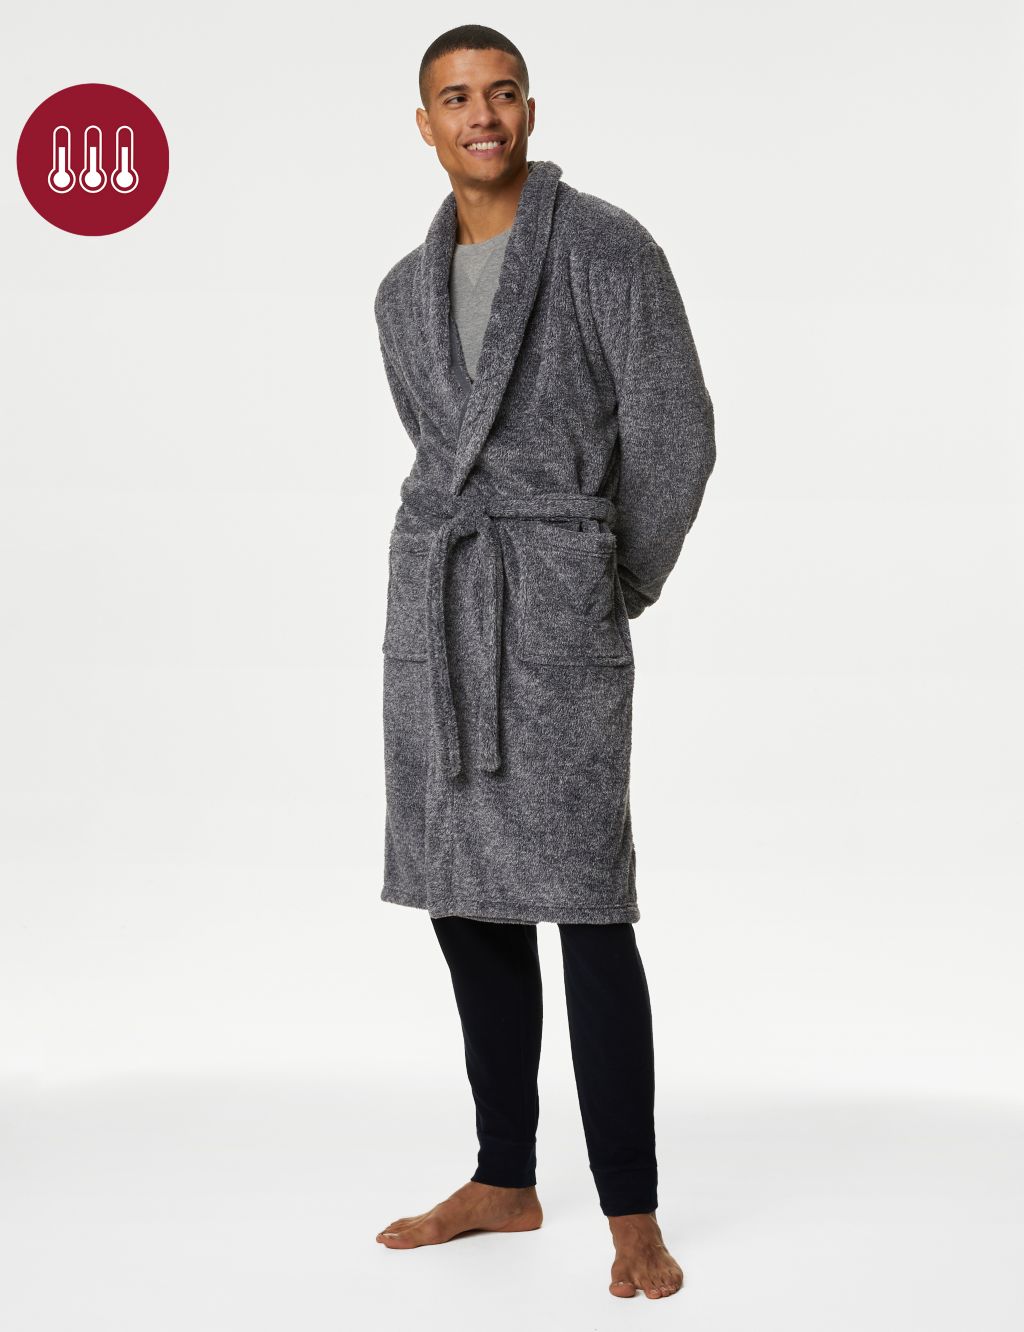 Fleece Supersoft Dressing Gown image 1